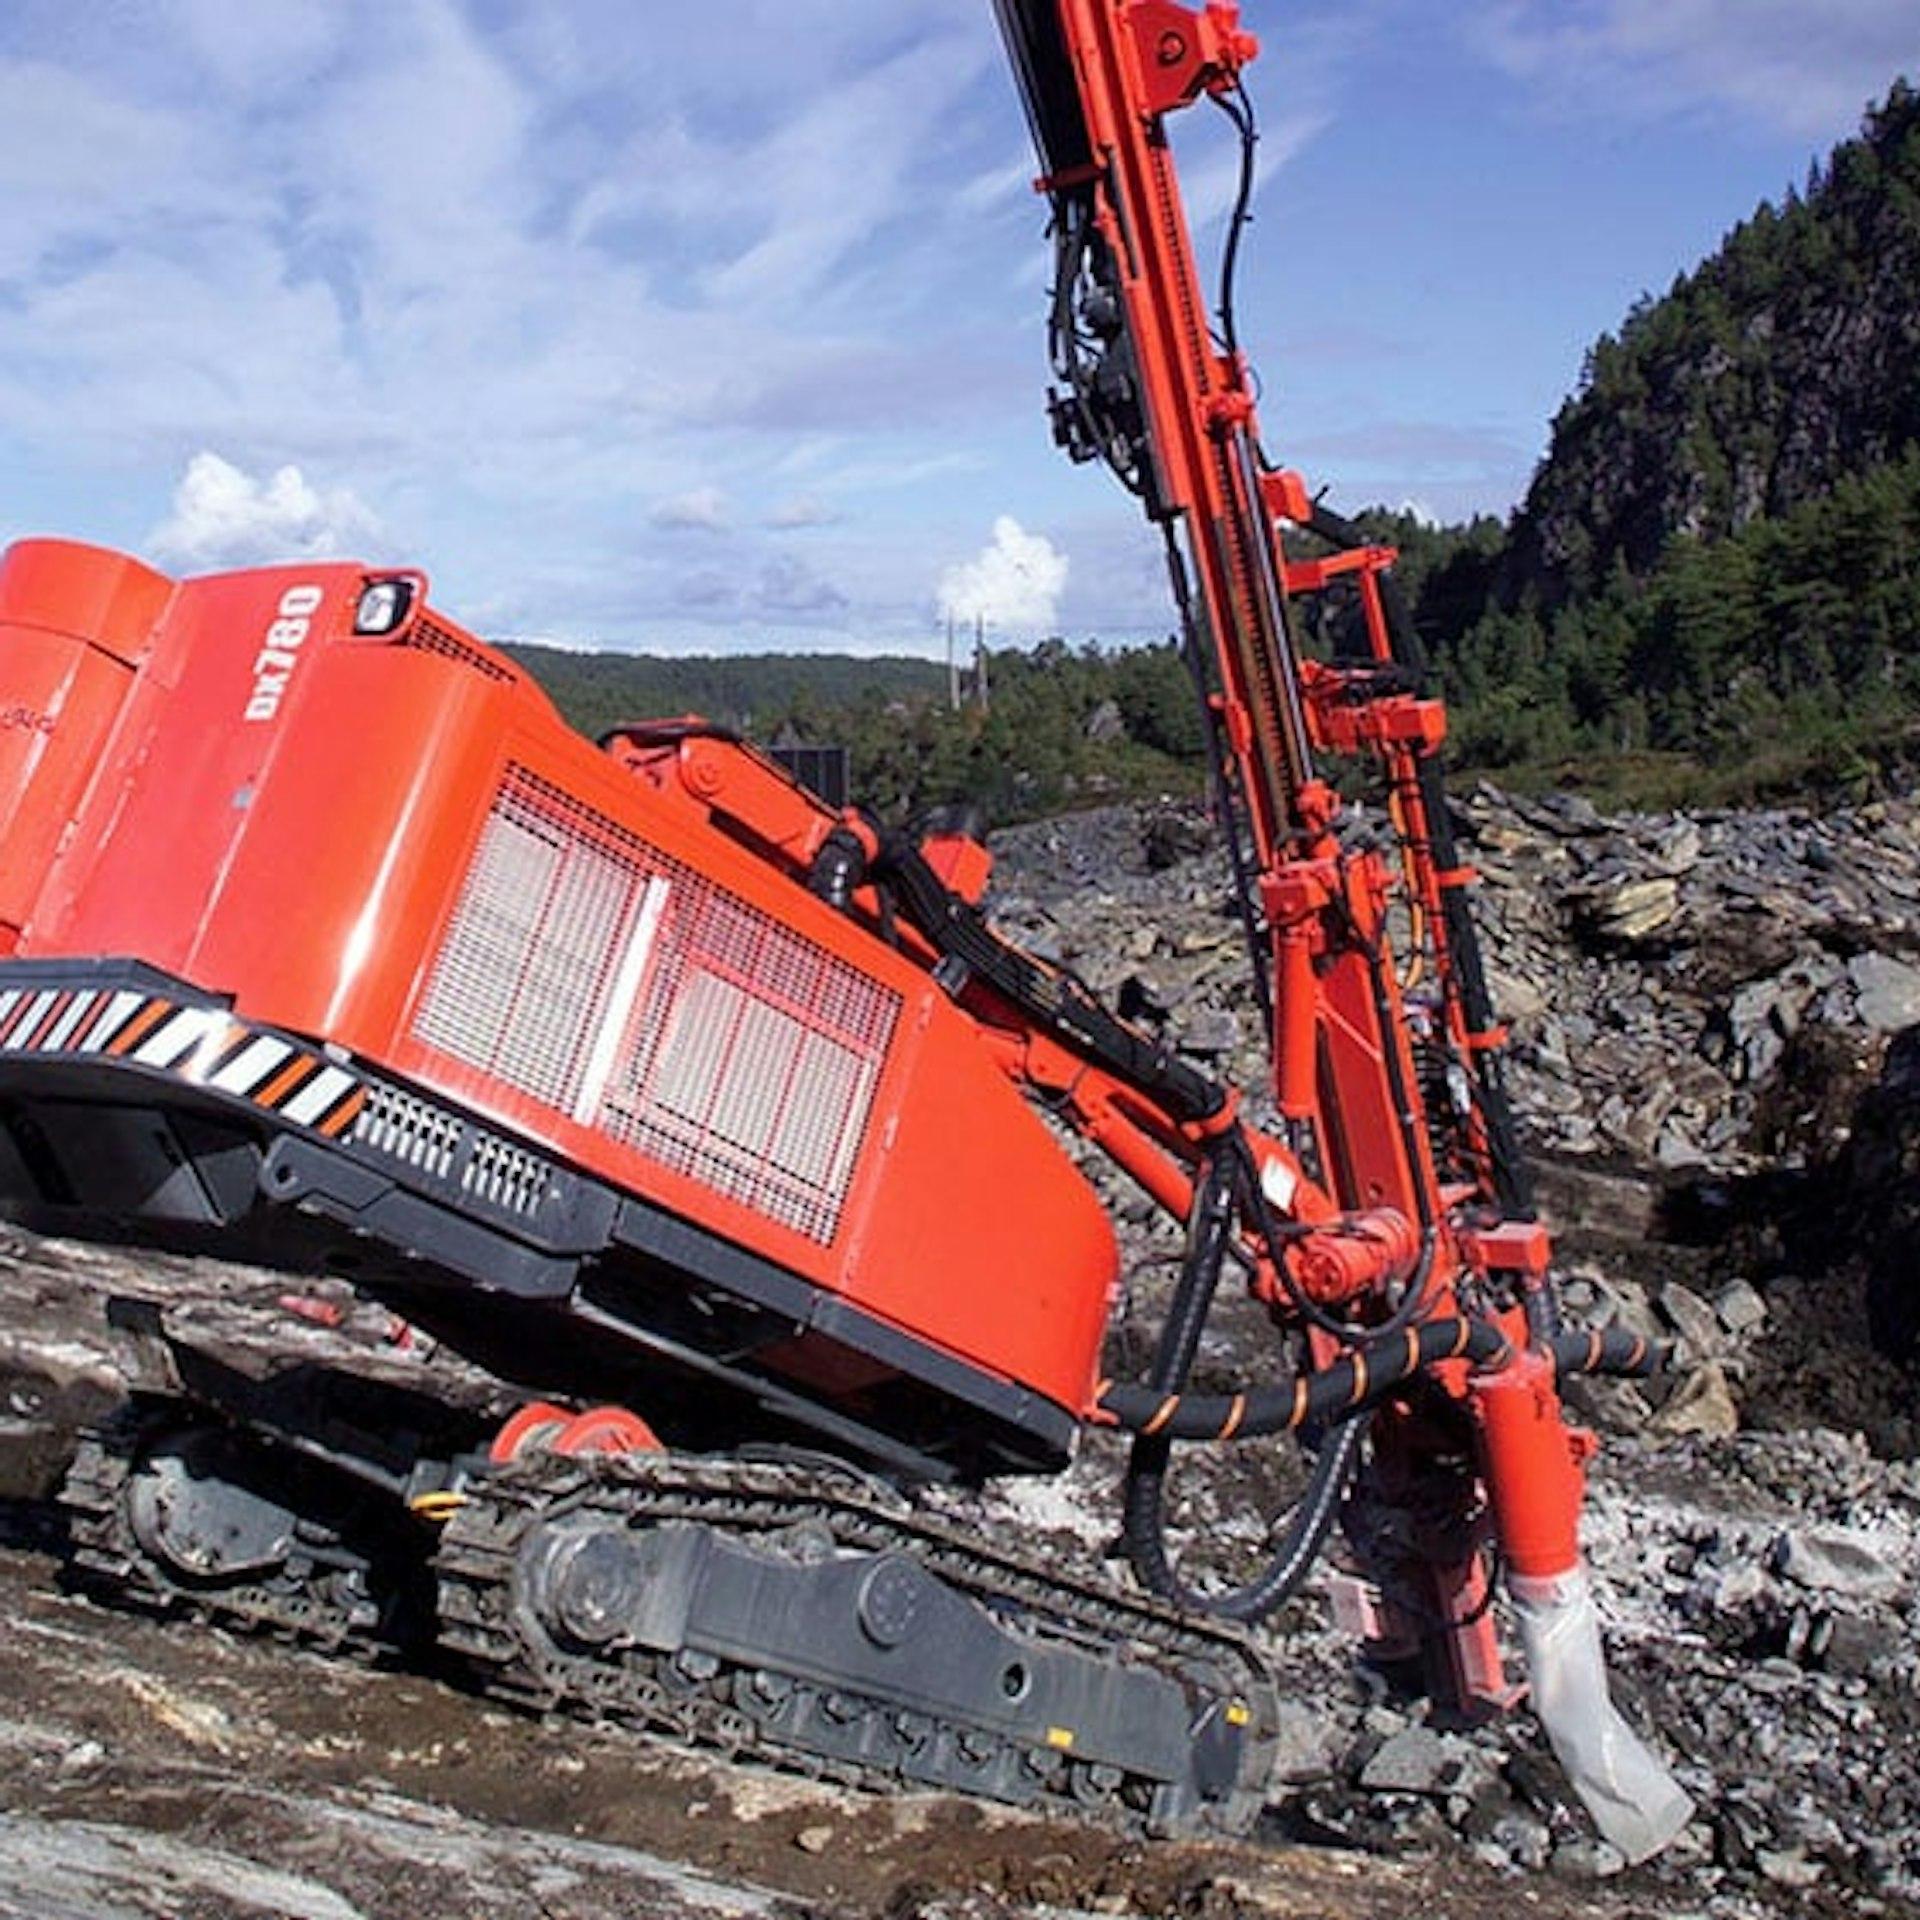 “The ability to break down costs is opening up new opportunities for us to streamline our operations.” Read the full Sandvik Mining customer case!